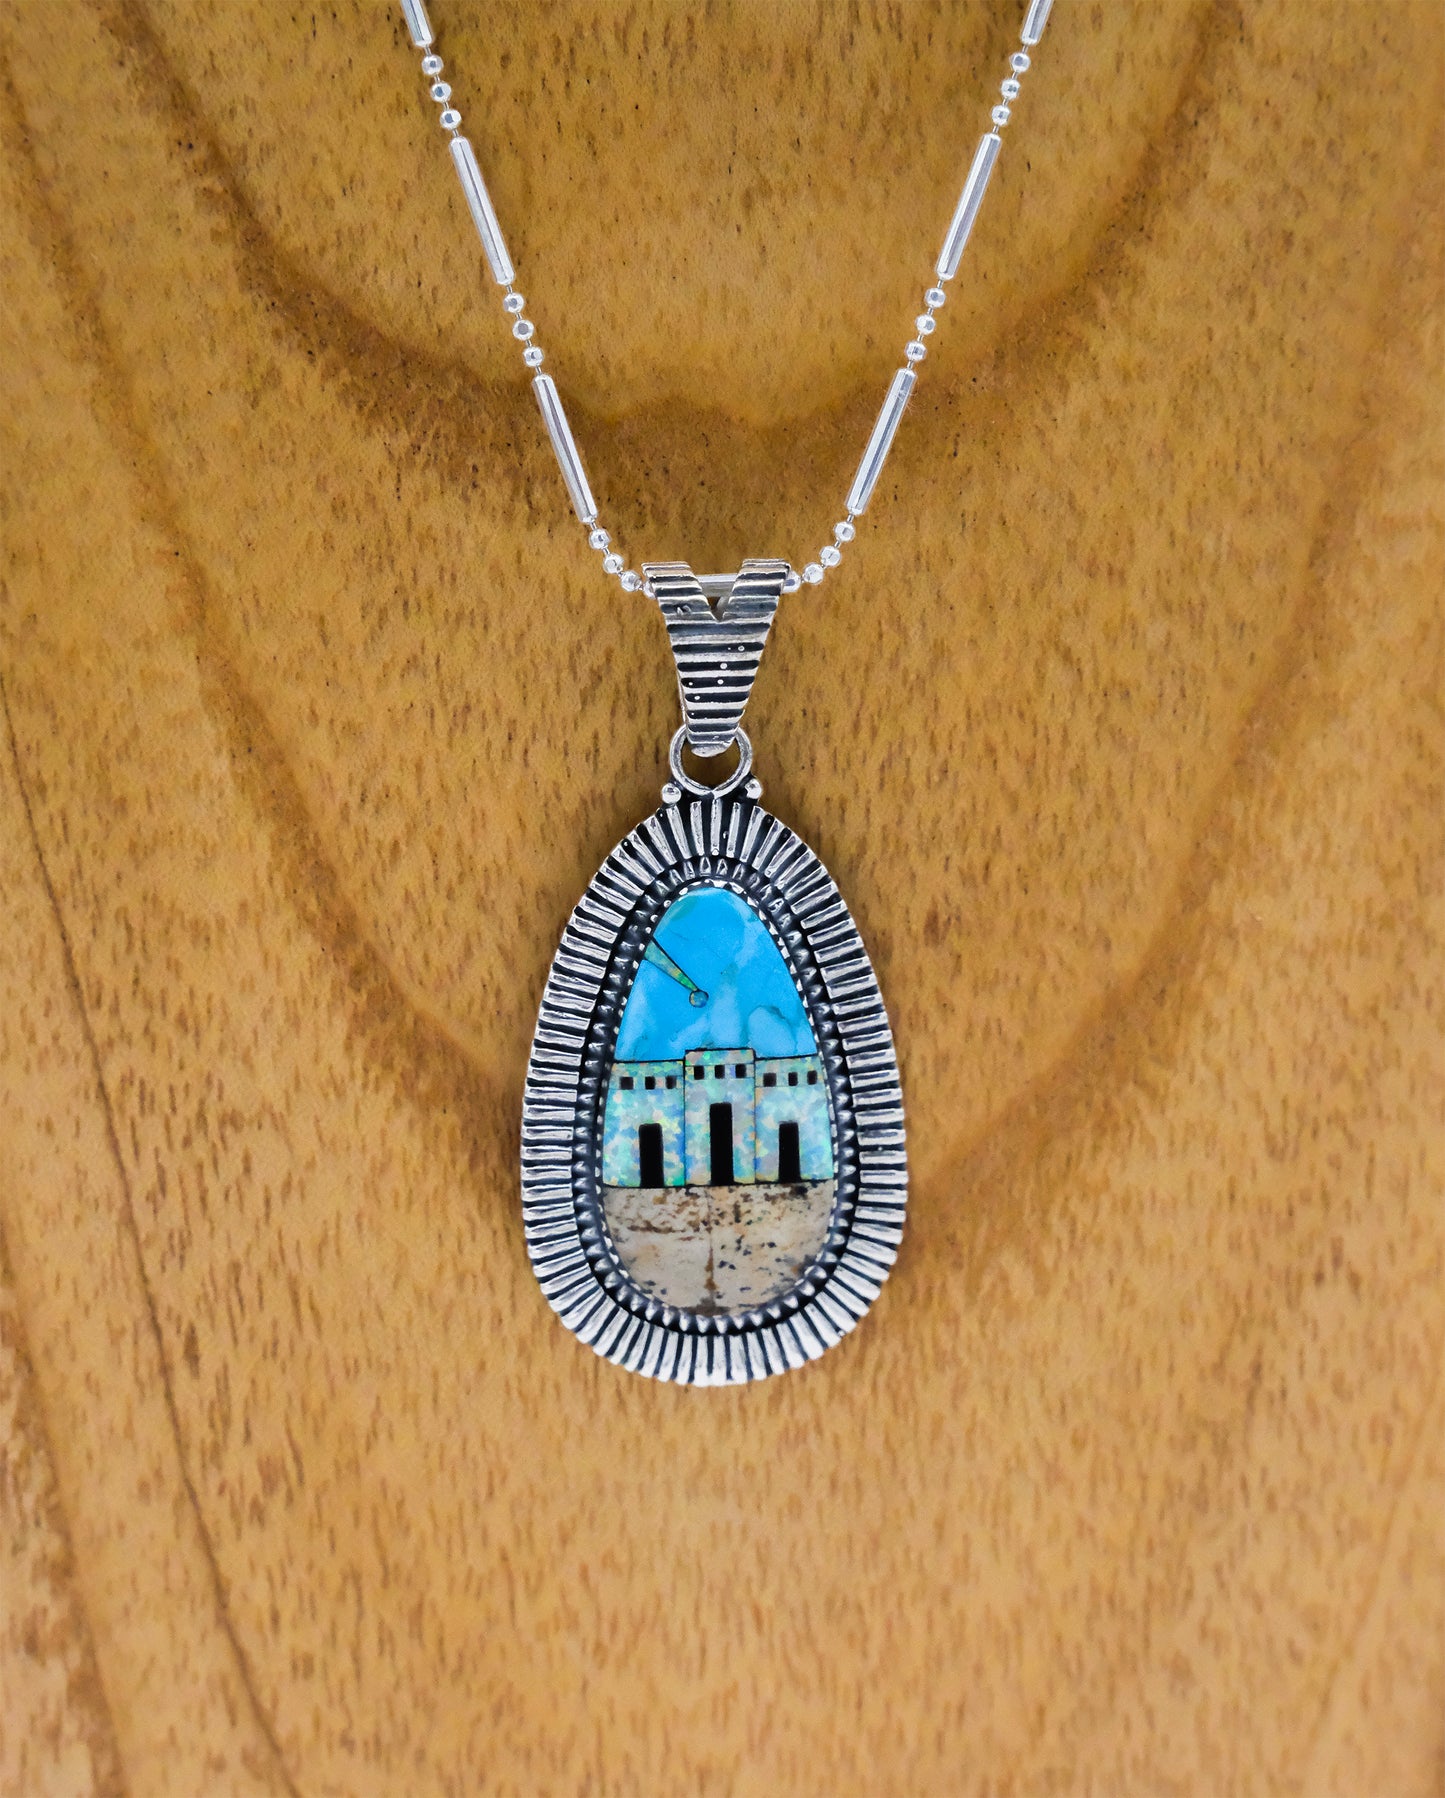 Inlaid Adobe Home Necklace